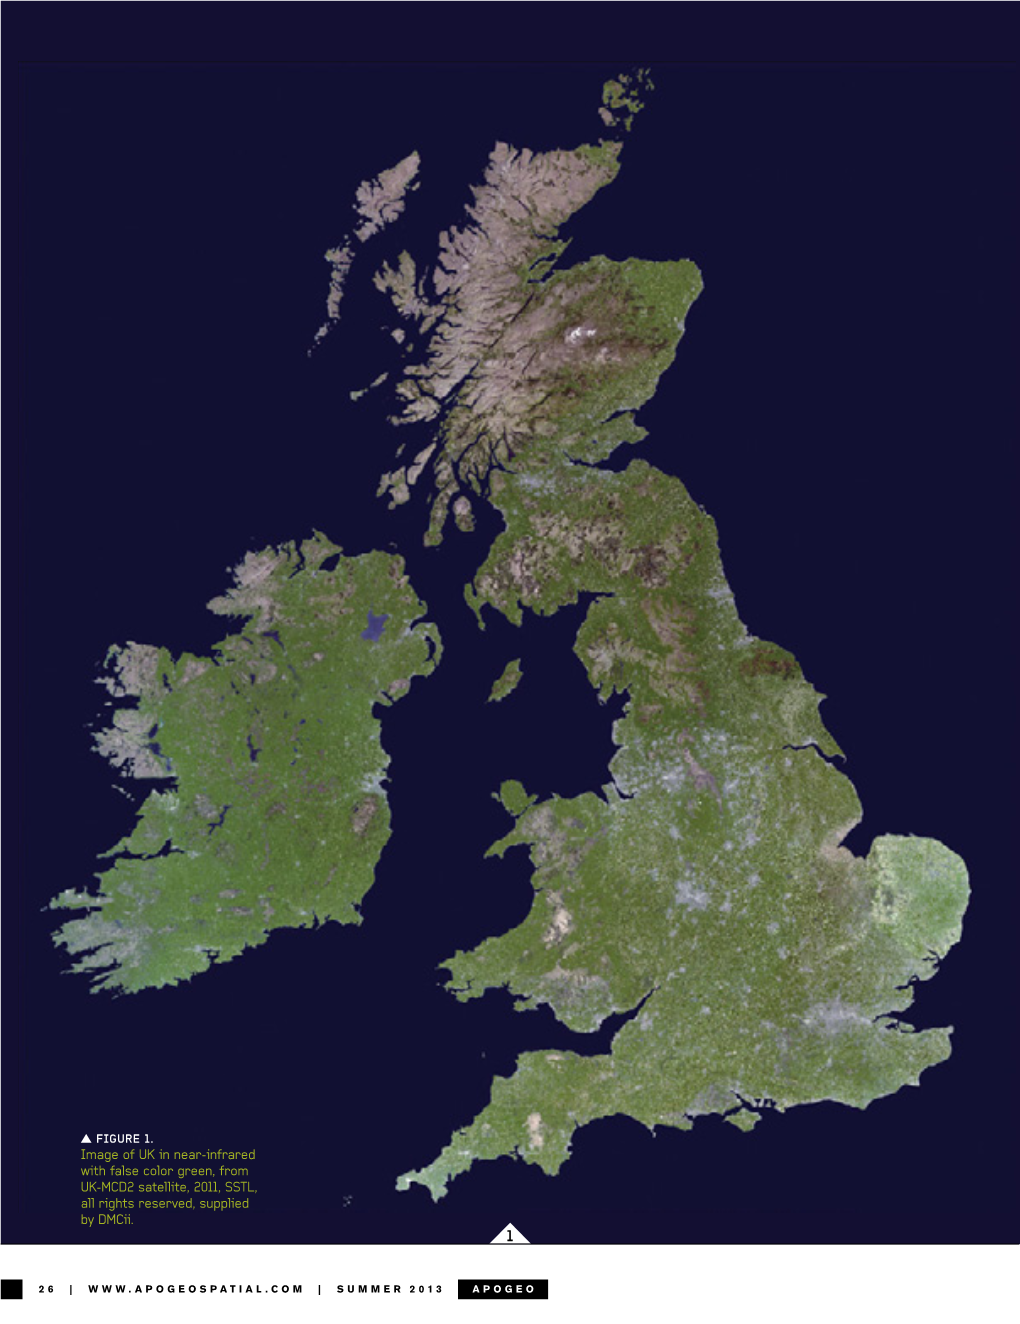 Image of UK in Near-Infrared with False Color Green, from UK-MCD2 Satellite, 2011, SSTL, All Rights Reserved, Supplied by Dmcii